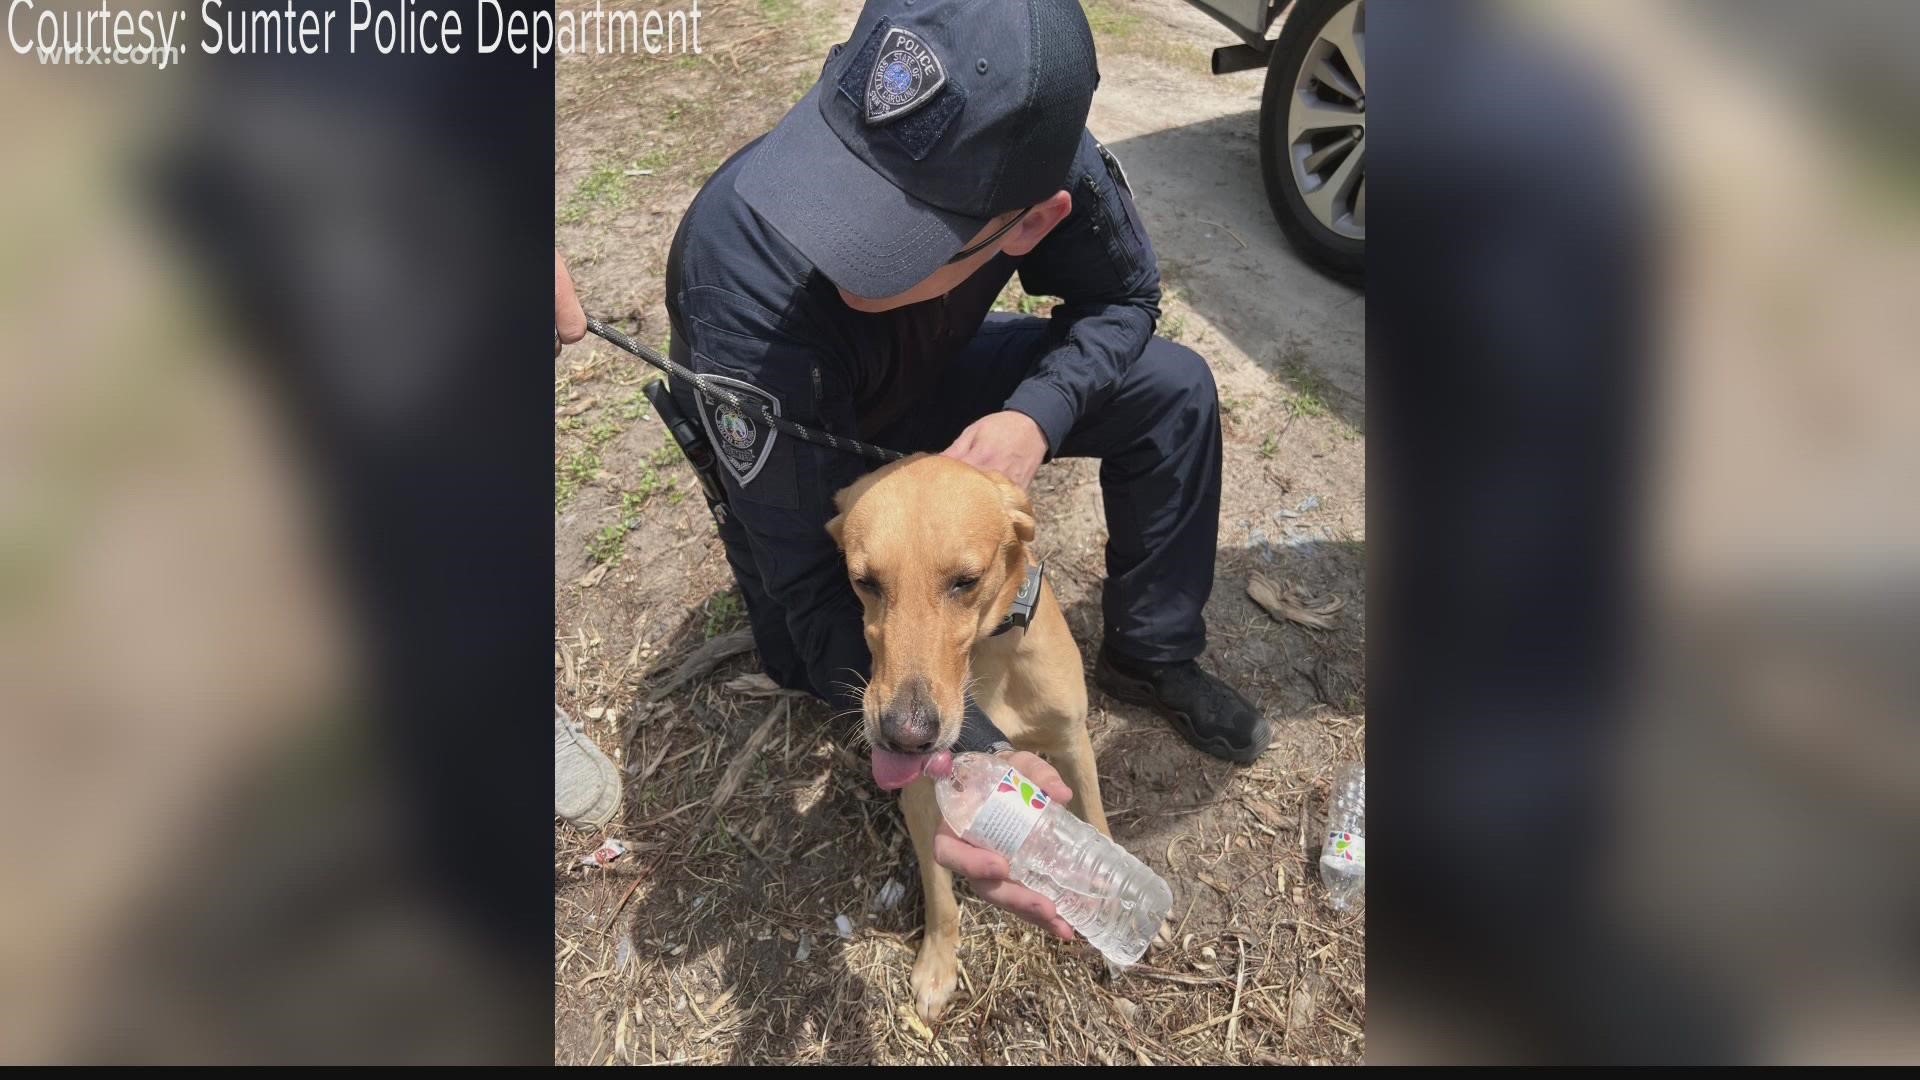 Jake, a 3-year-old yellow lab, got away from his tracking team after a successful search for an elderly person earlier Sunday.